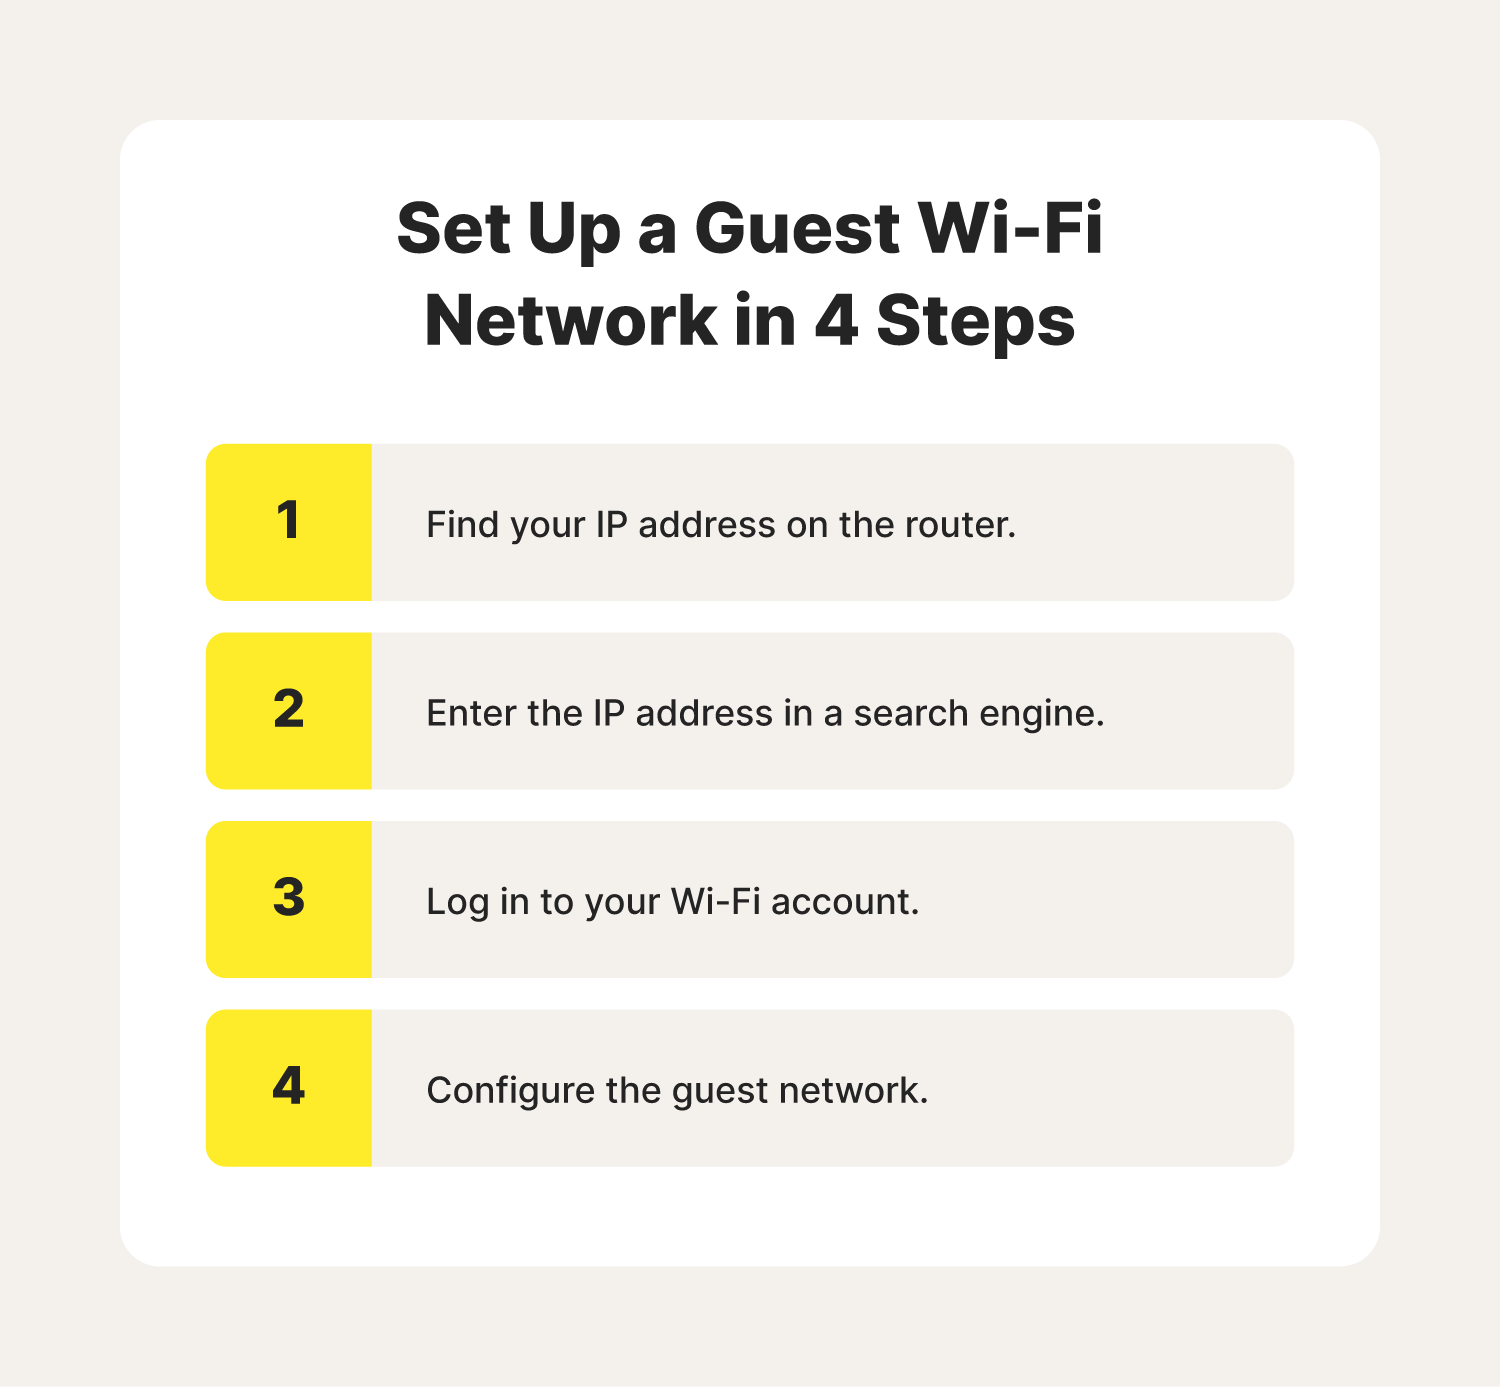 A four-step list that shows how to set up a guest Wi-Fi network.